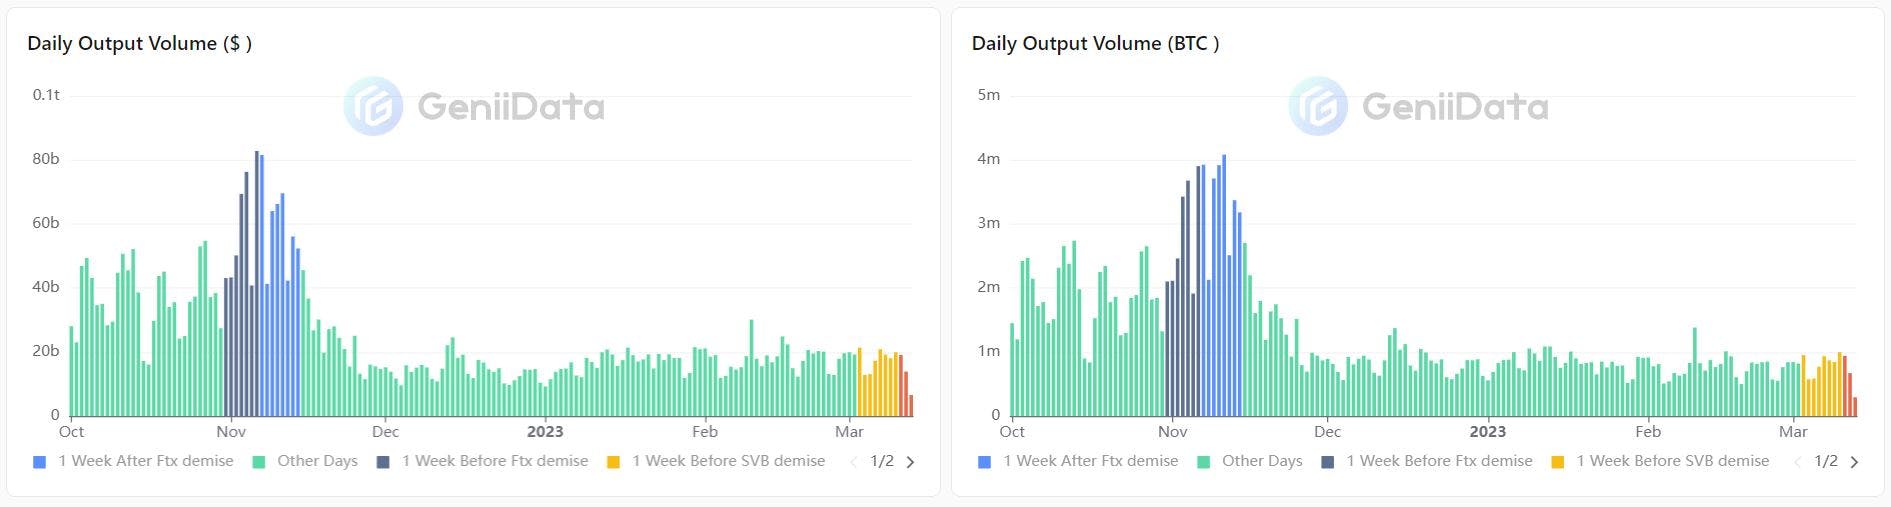 Daily Transferred Volume in BTC and $USD